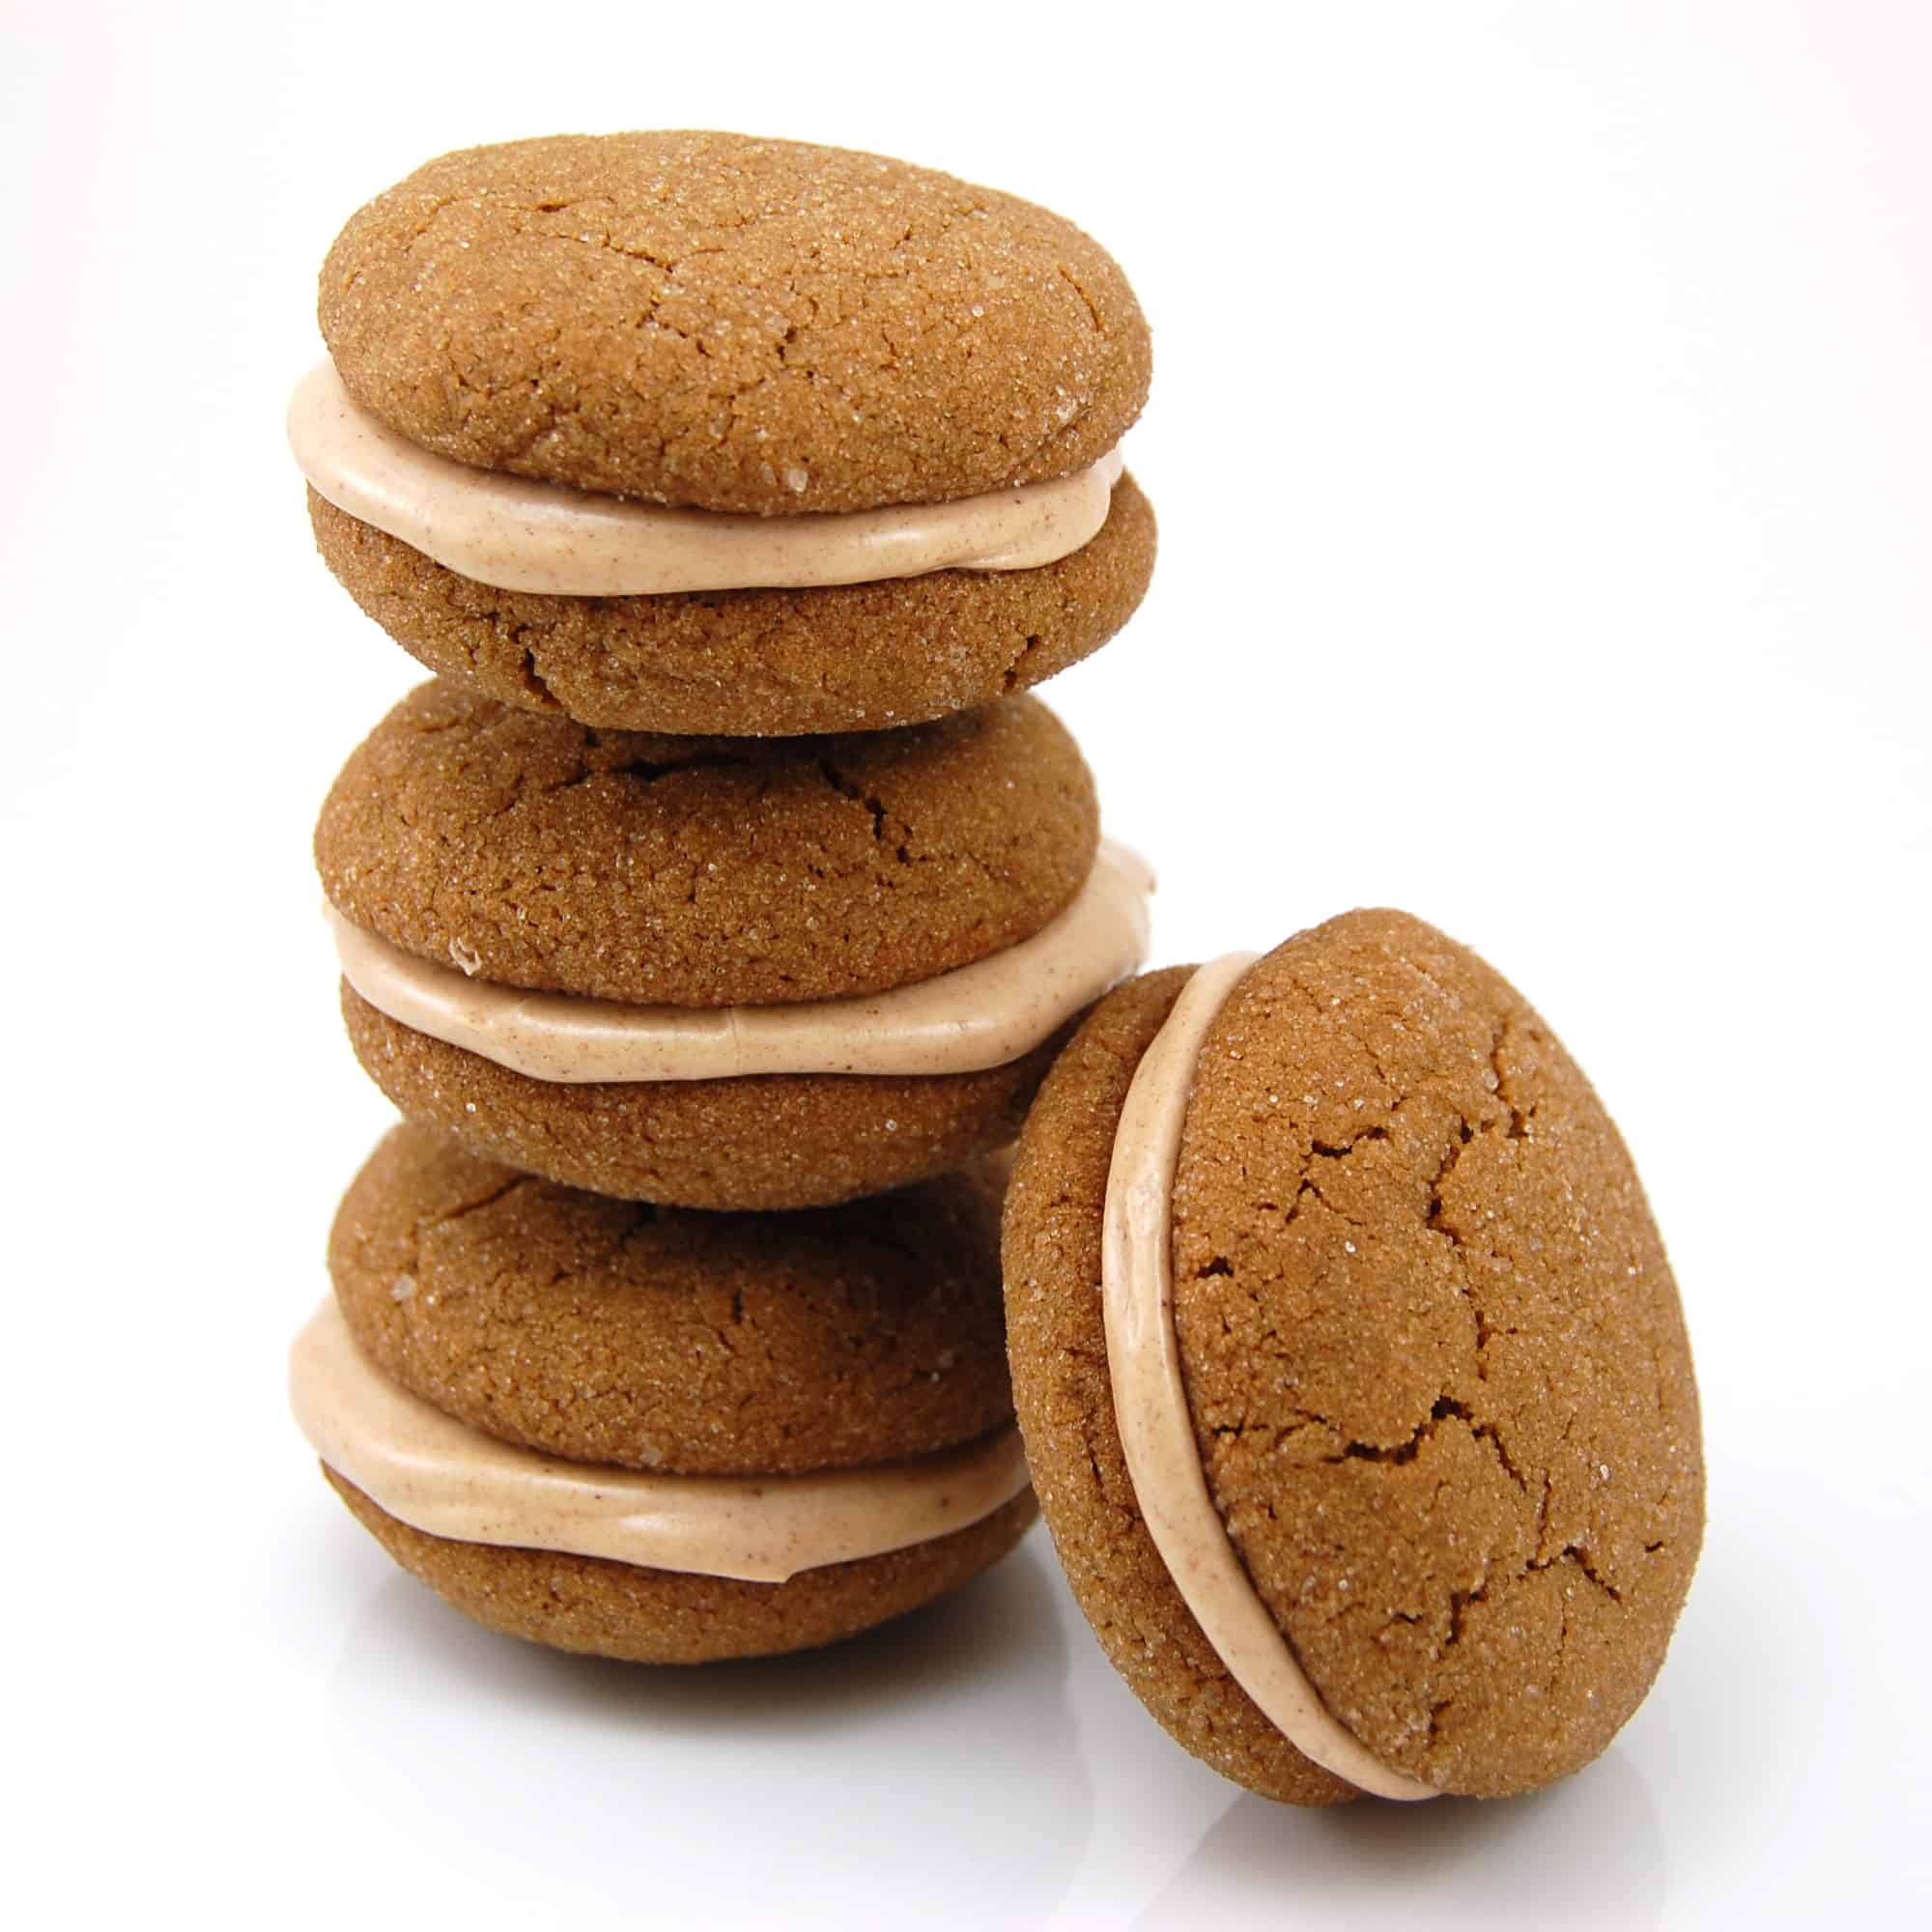 Ginger Sandwich Cookies with Cinnamon Cream Filling